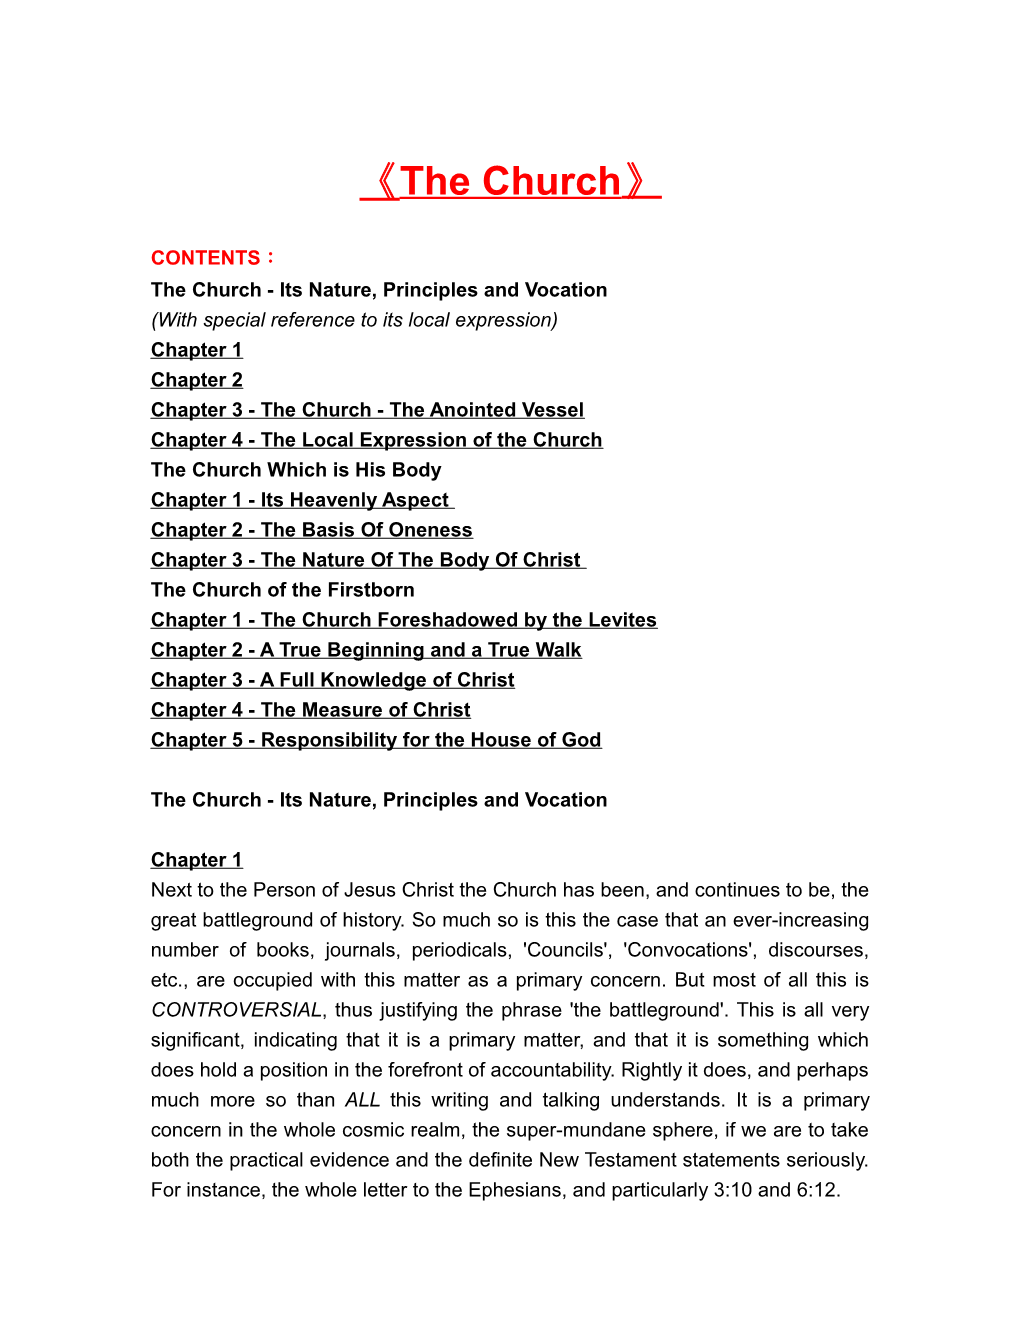 The Church - Its Nature, Principles and Vocation